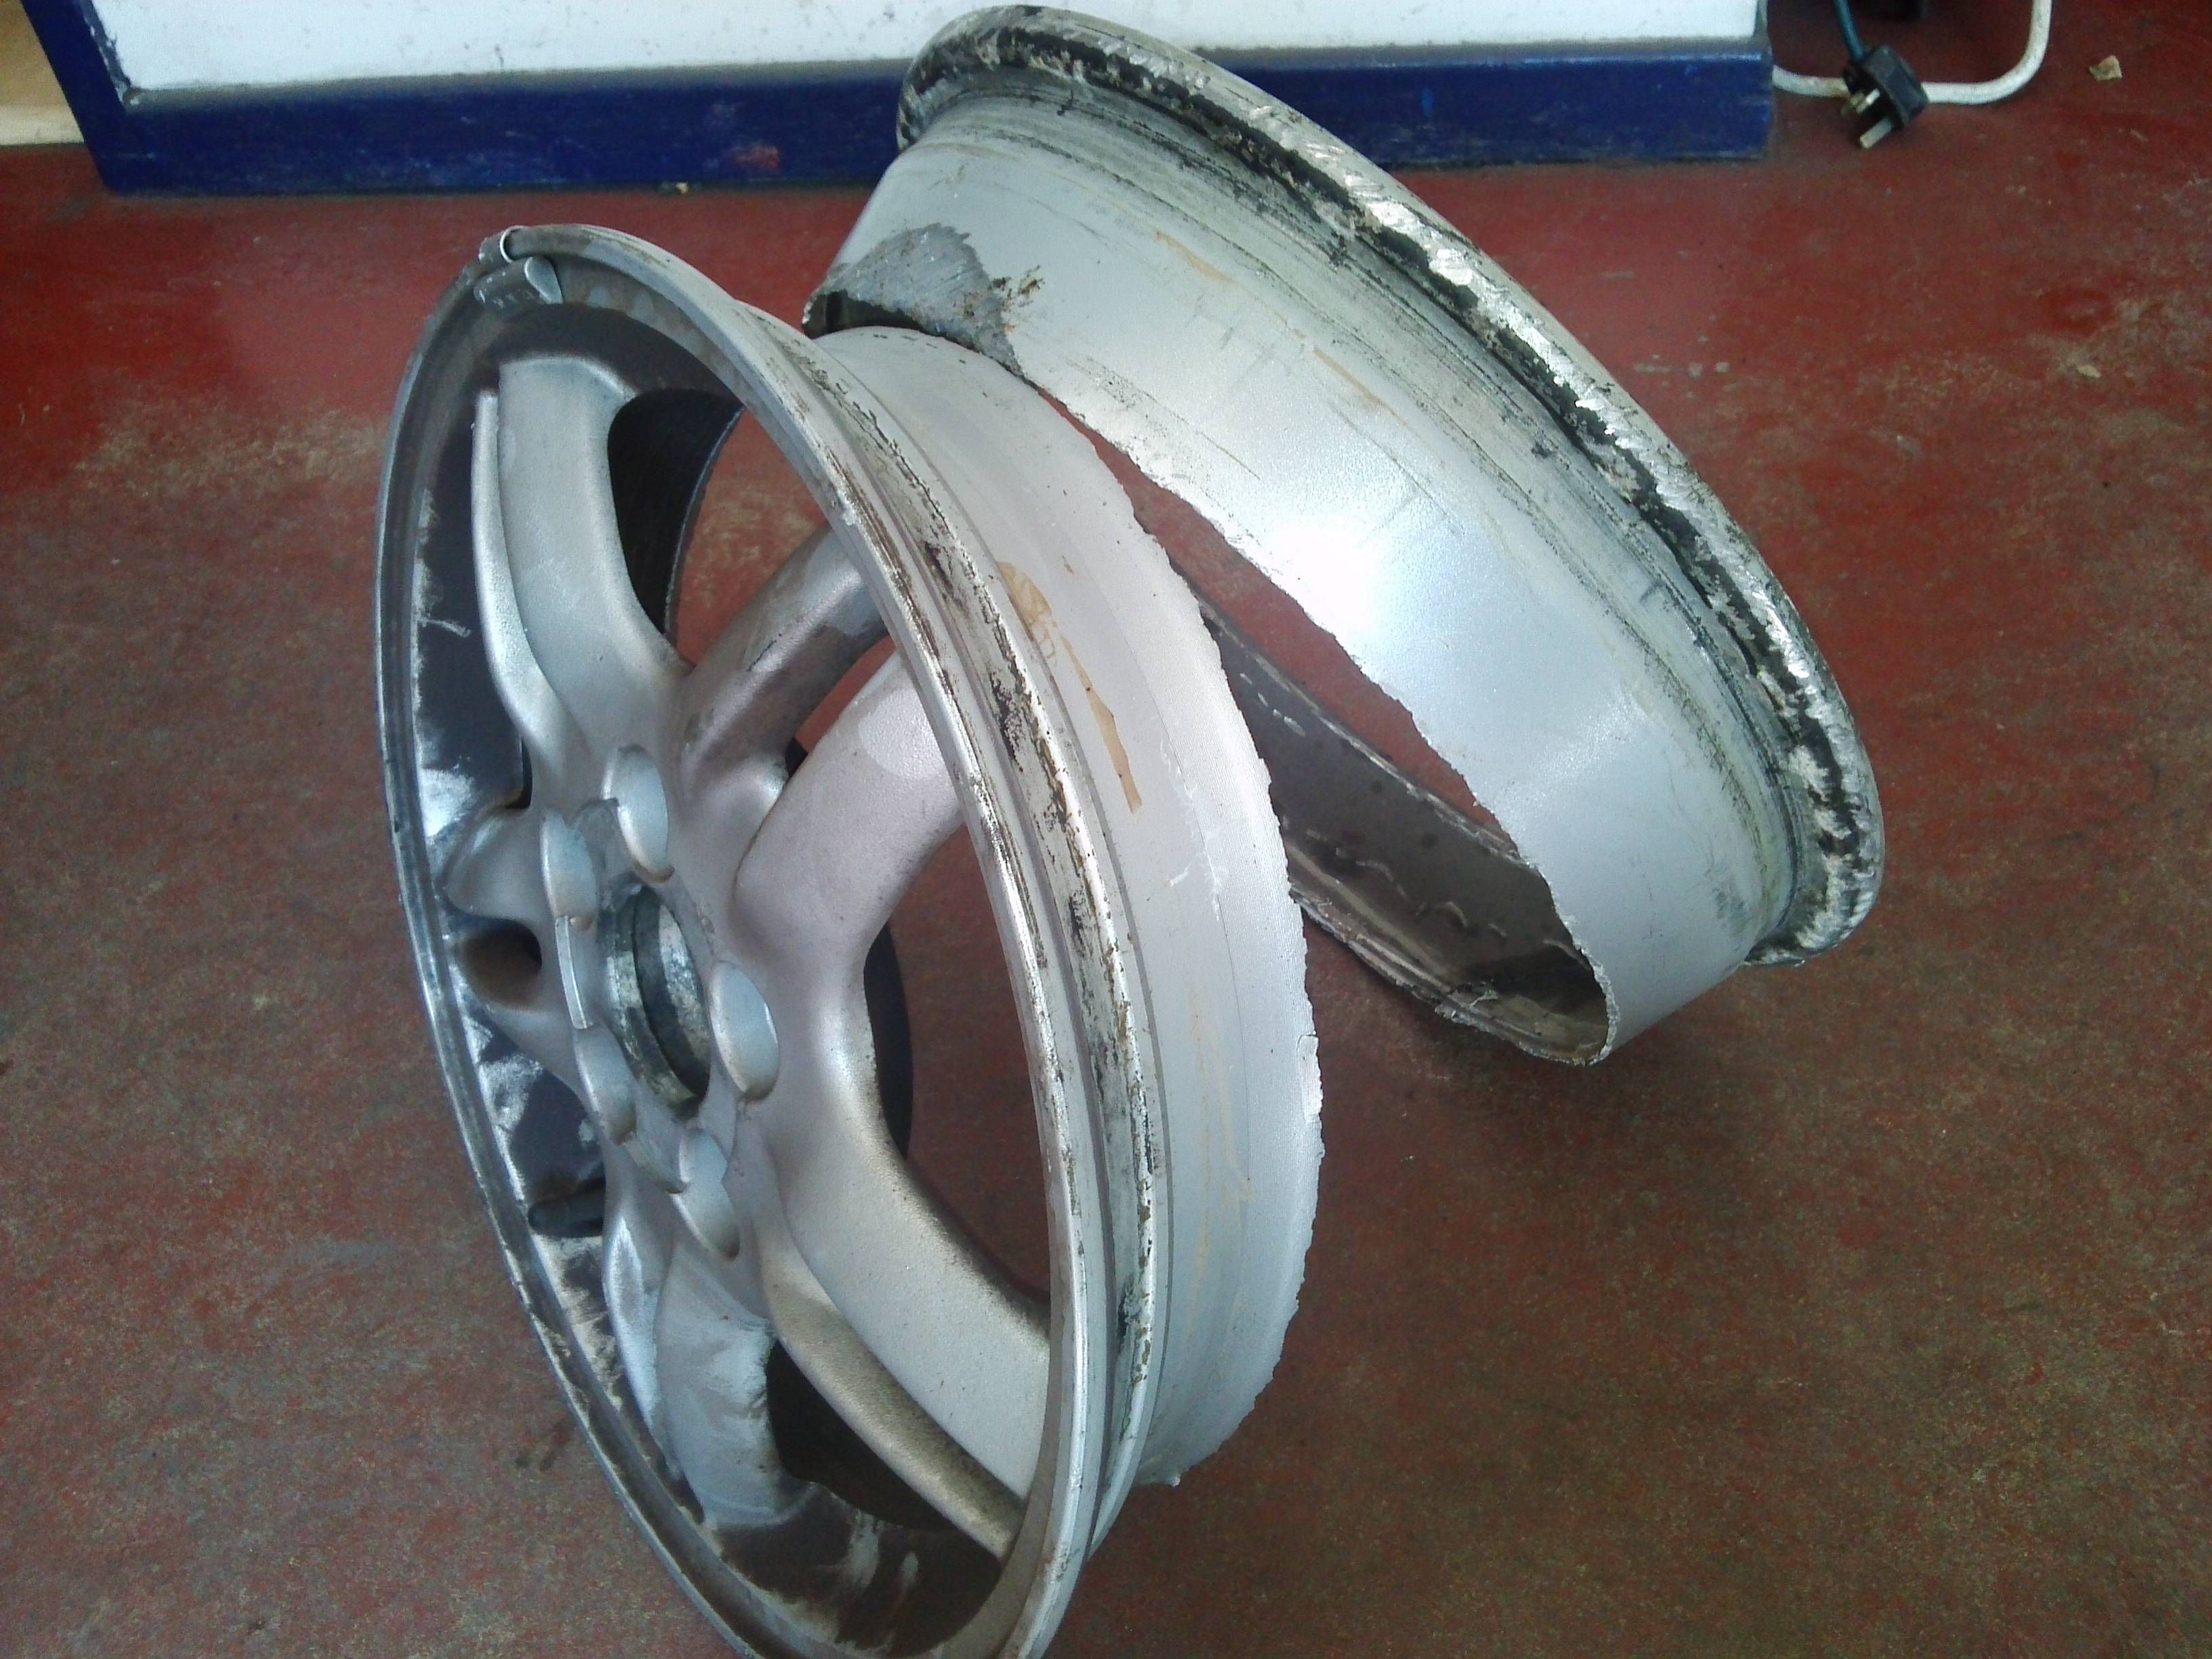 A customers wheel split in two during a blowout